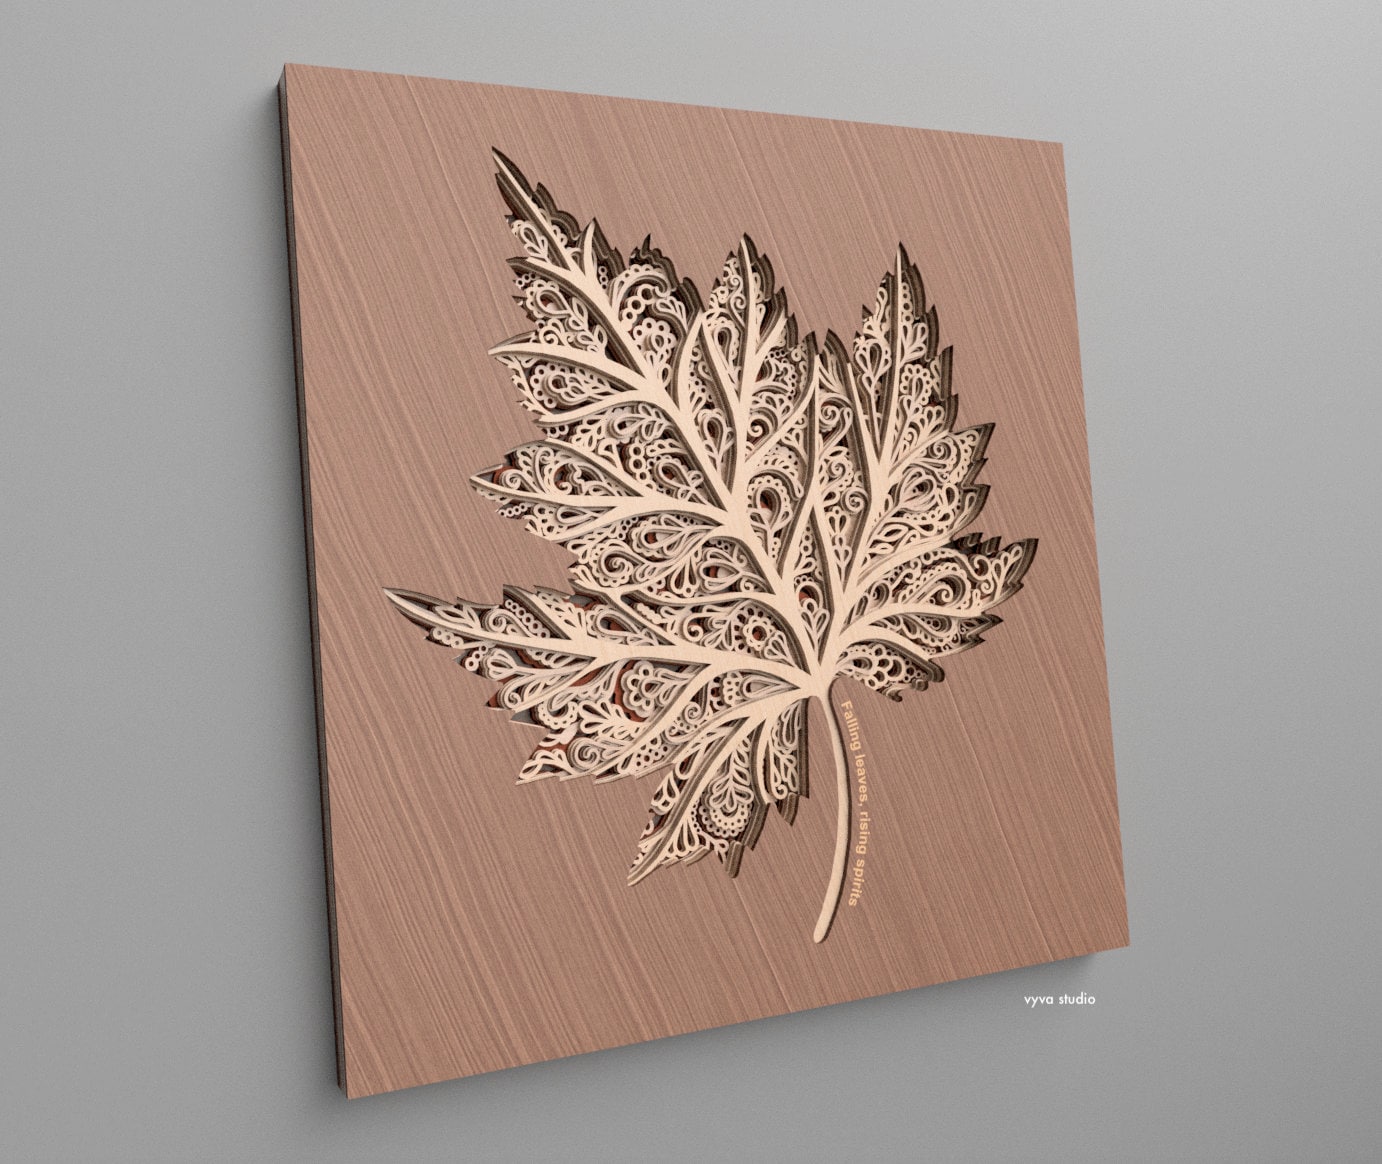 3D wall sticker autumn tree, leaves, sun, gold - Wall Decal M1163